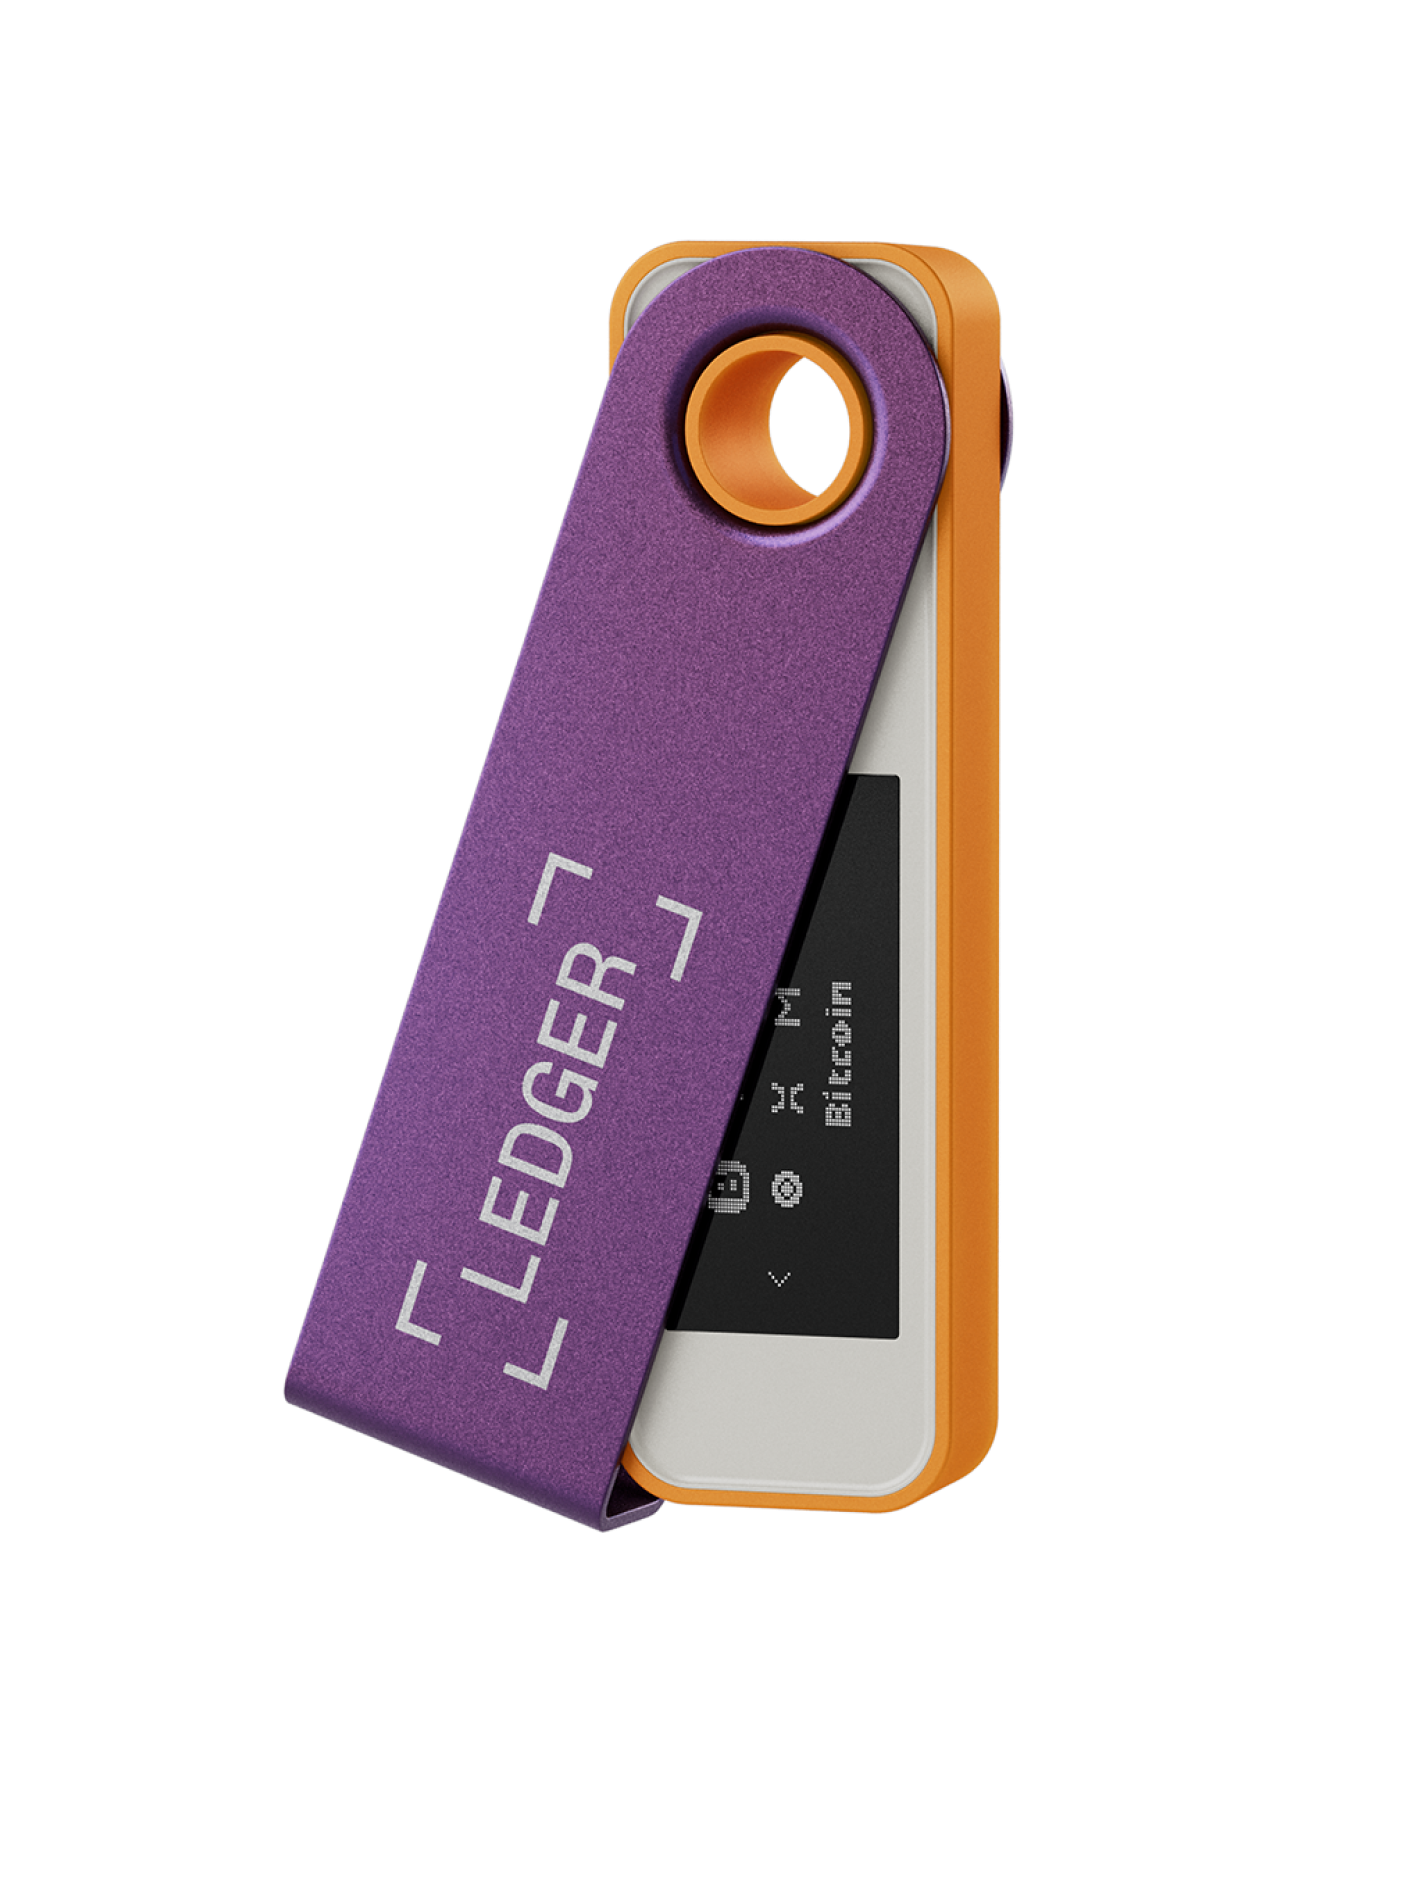 Ledger Nano S - Cryptocurrency Hardware Wallet *NEW* 3760027781371